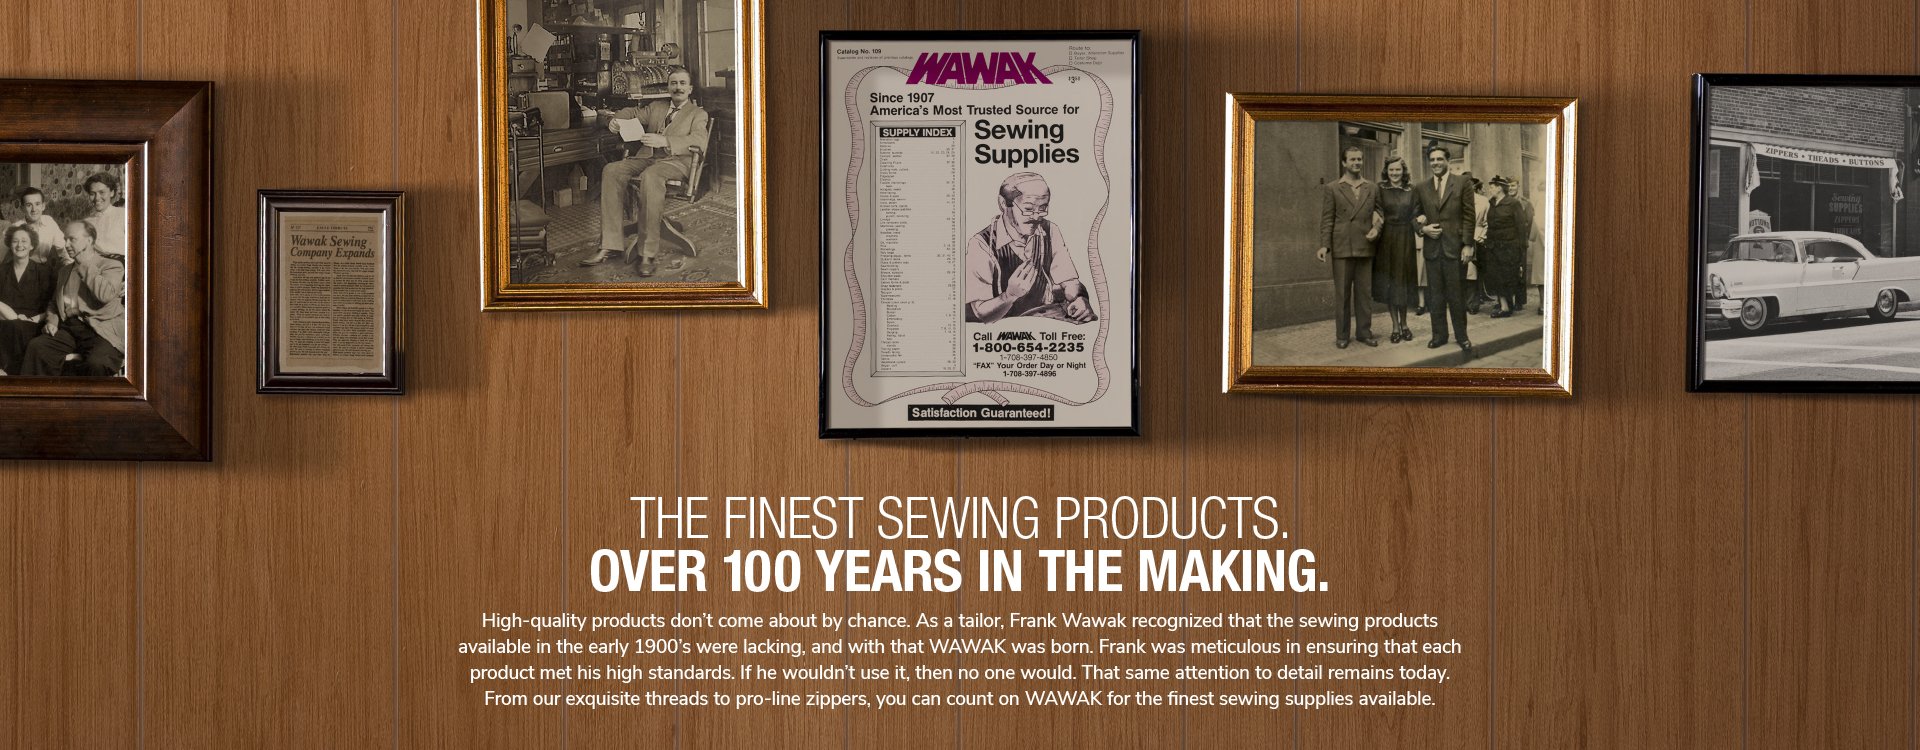 The Finest Sewing Products. Over 100 Years In The Making. High-quality products don’t come about by chance. As a tailor, Frank Wawak recognized that the sewing products available in the early 1900’s were lacking, and with that WAWAK was born. Frank was meticulous in ensuring that each product met his high standards. If he wouldn’t use it, then no one would. That same attention to detail remains today.  From our exquisite threads to pro-line zippers, you can count on WAWAK for the finest sewing supplies available.